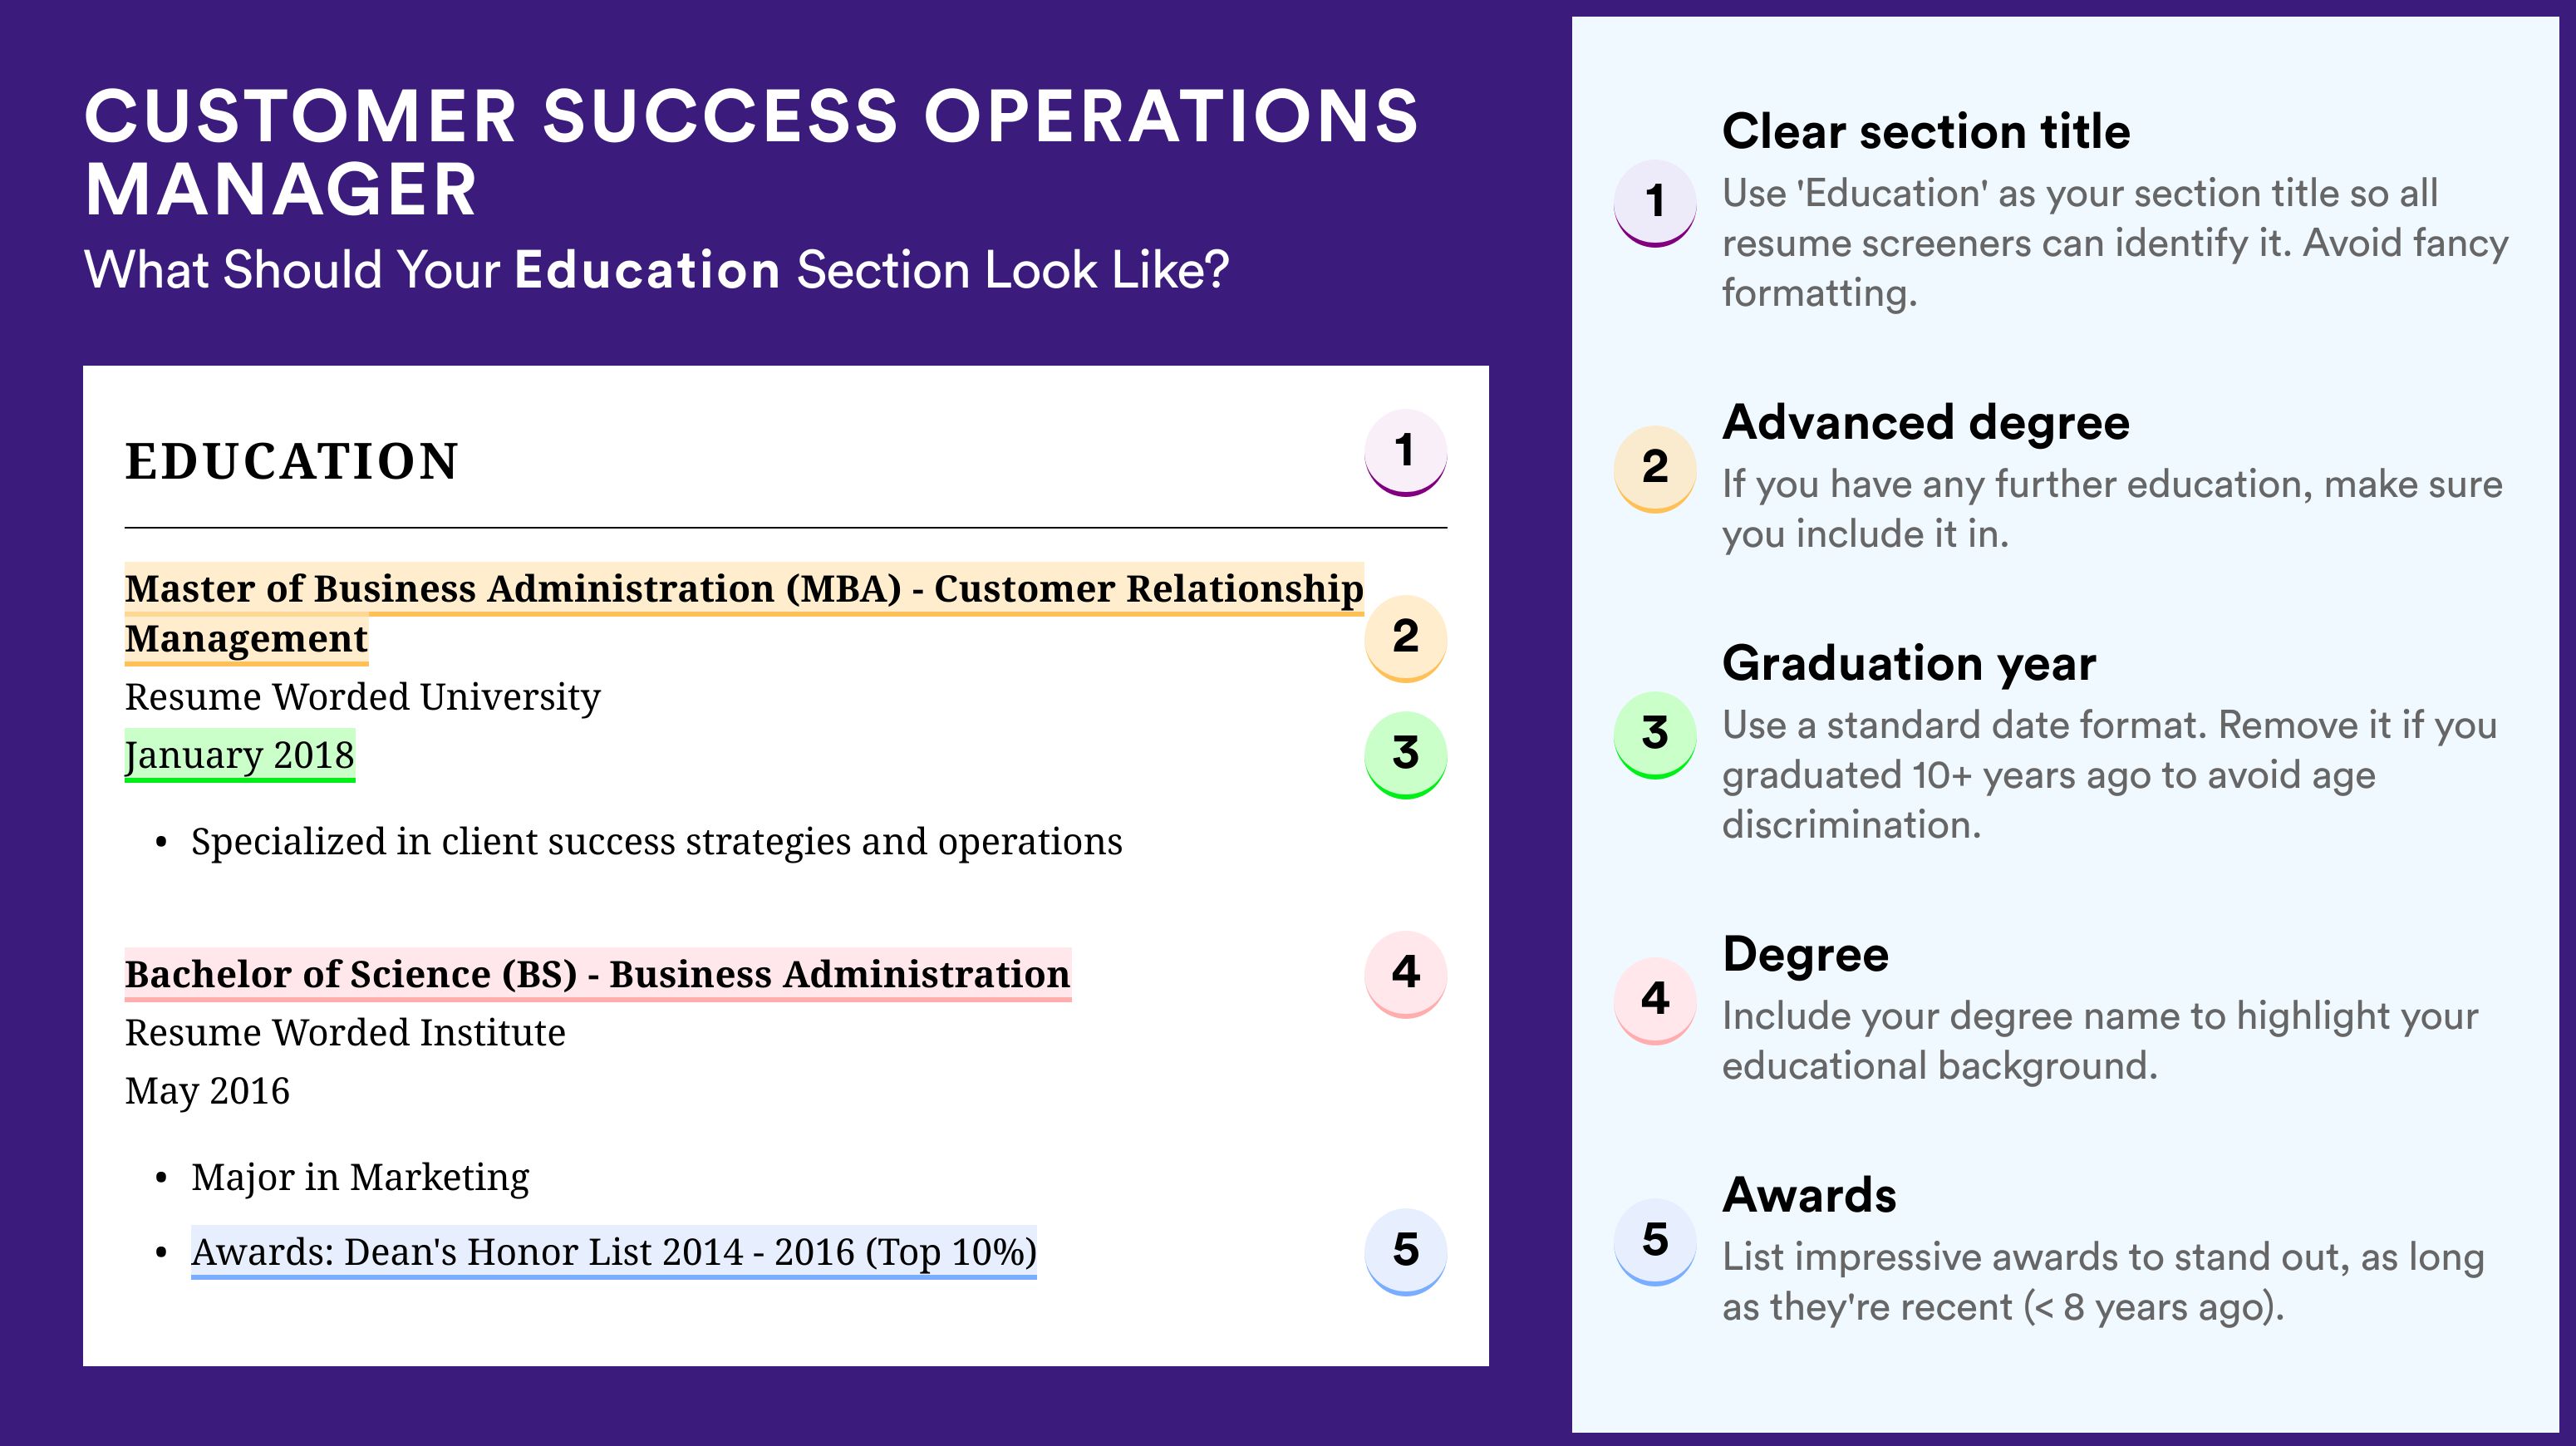 How To Write An Education Section - Customer Success Operations Manager Roles